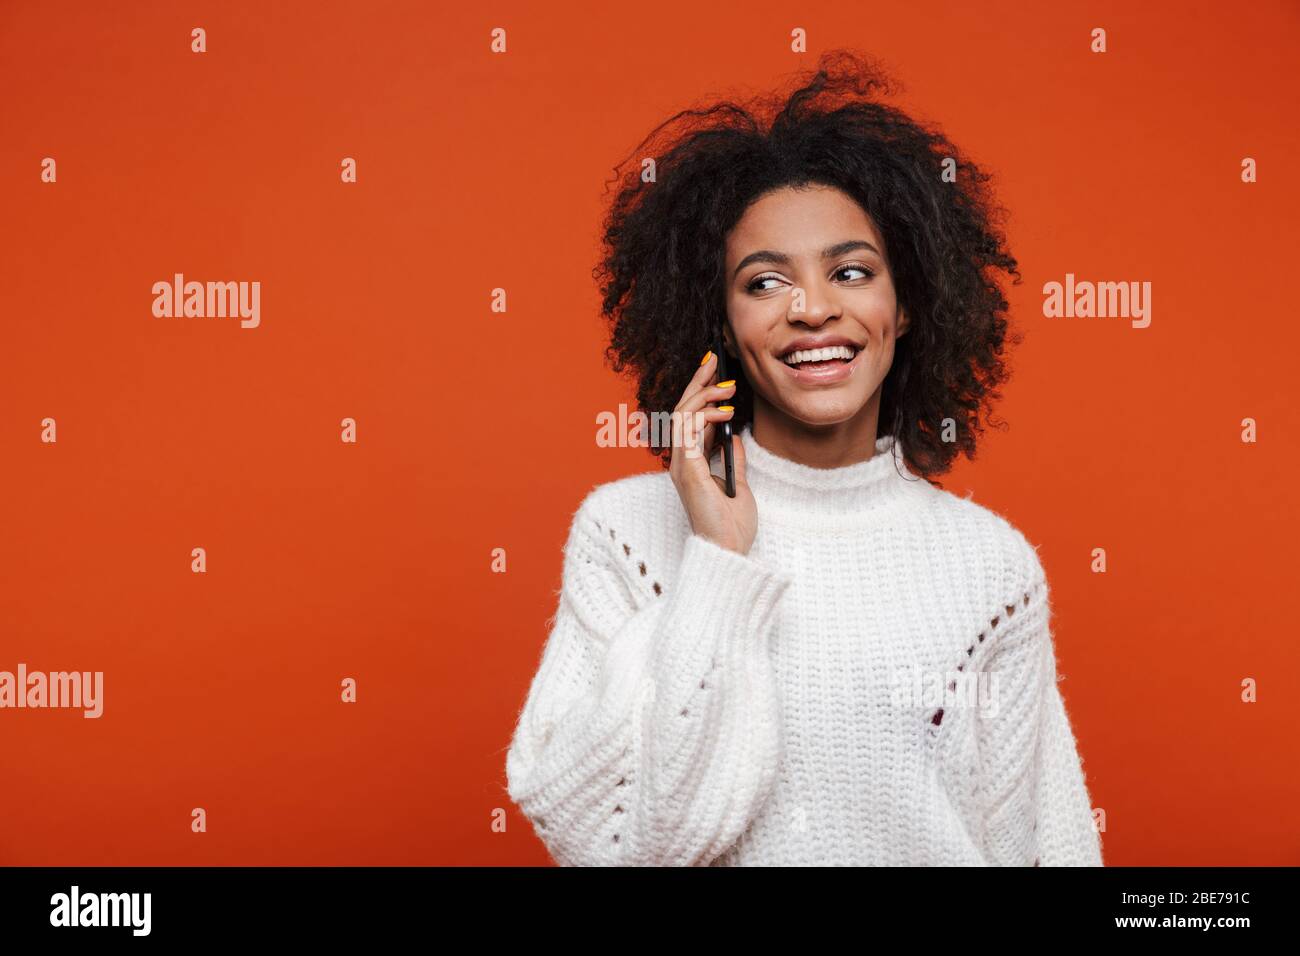 Attractive young african woman wearing sweater talking on mobile phone isolated over red background Stock Photo